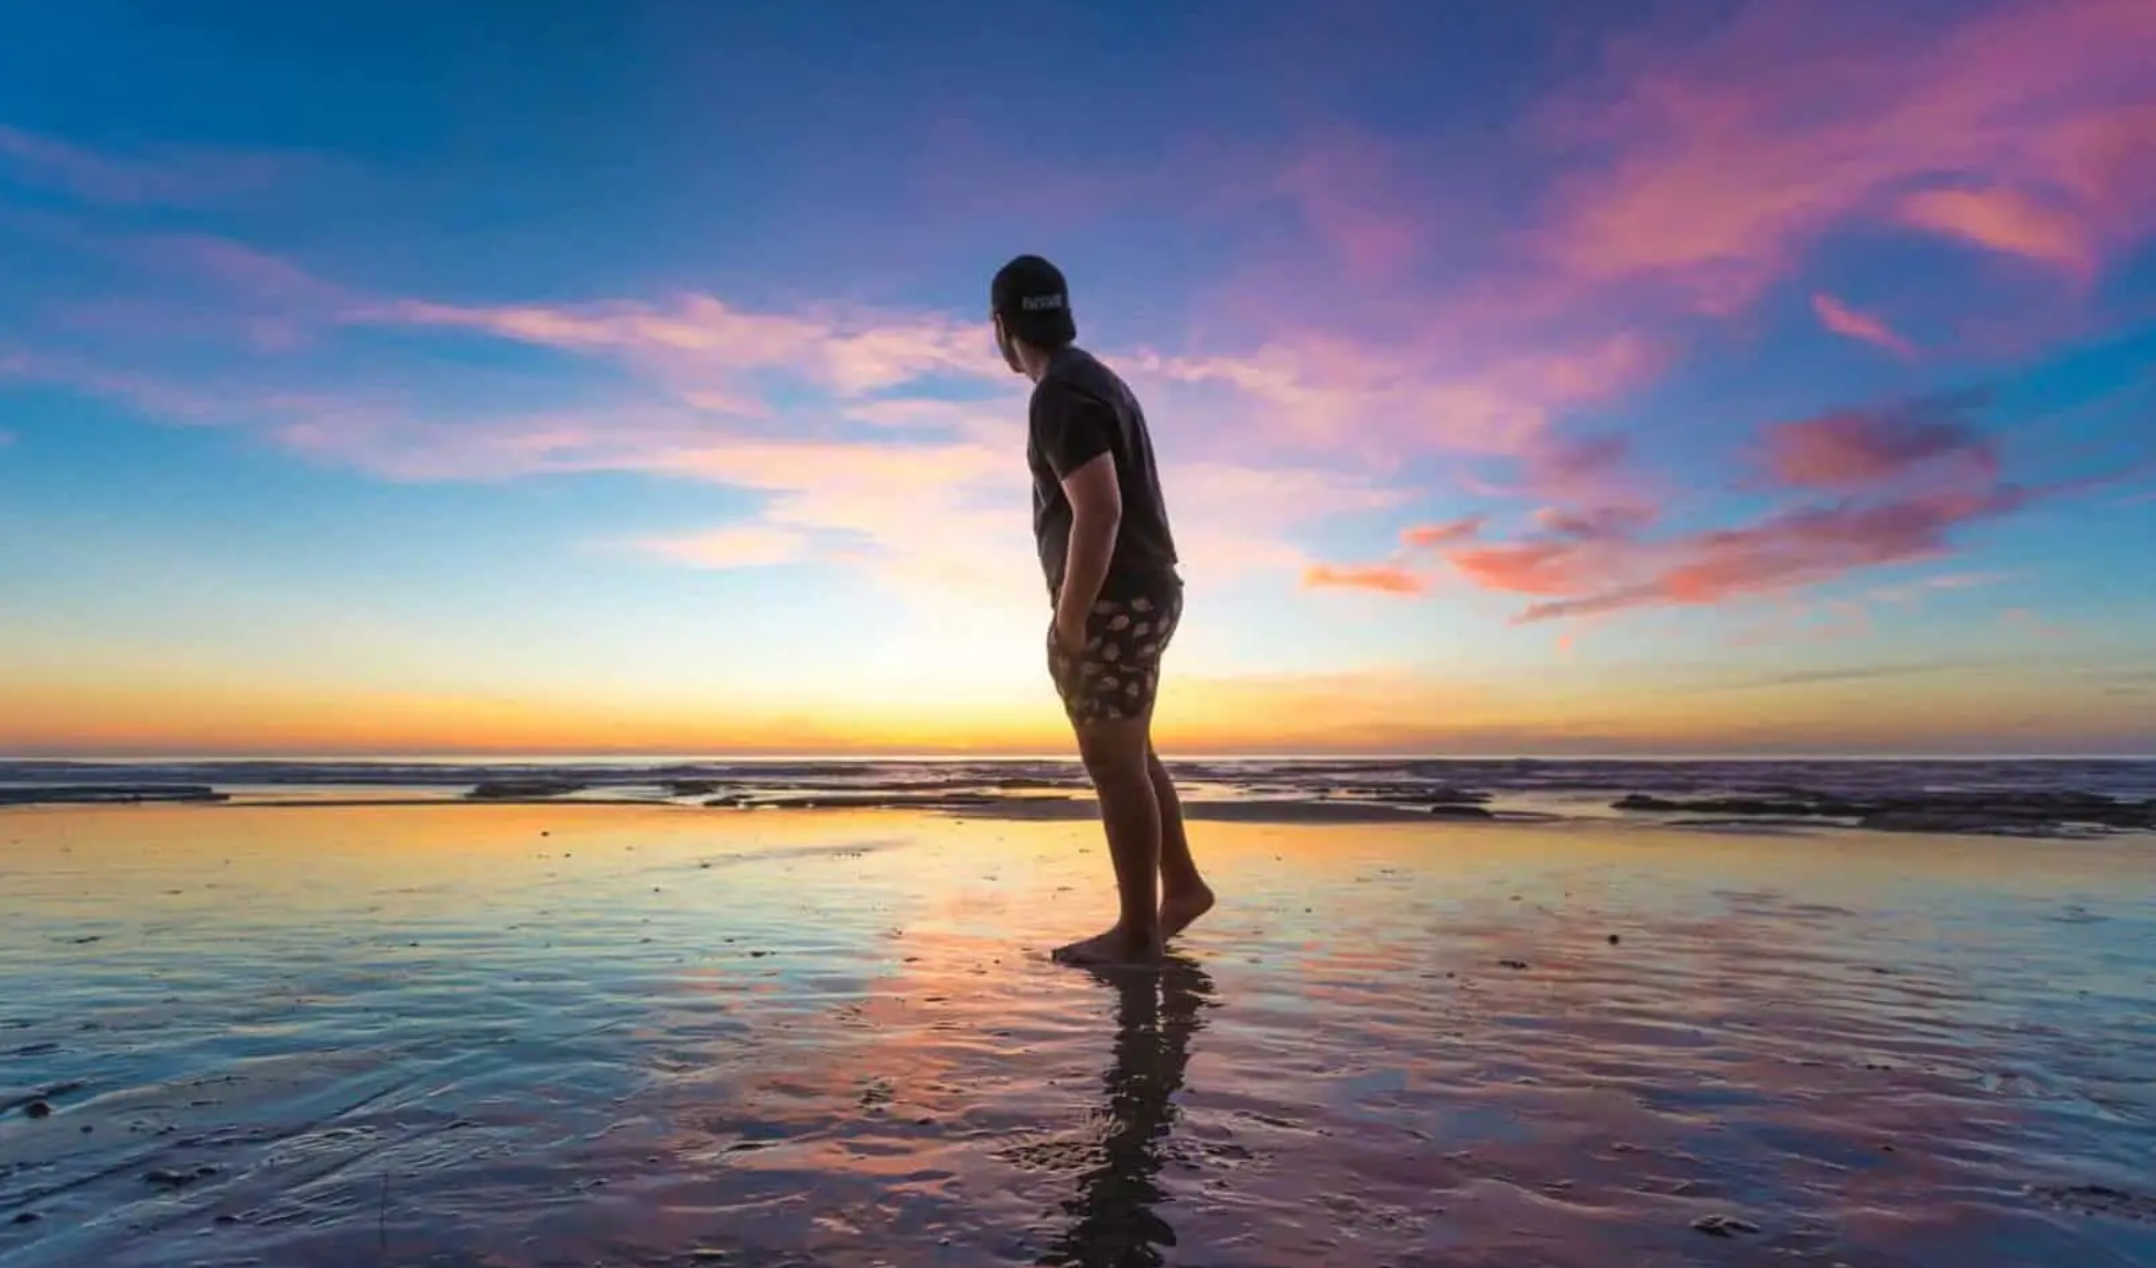 Man walking at the beach with his feet in the sand and a sunset